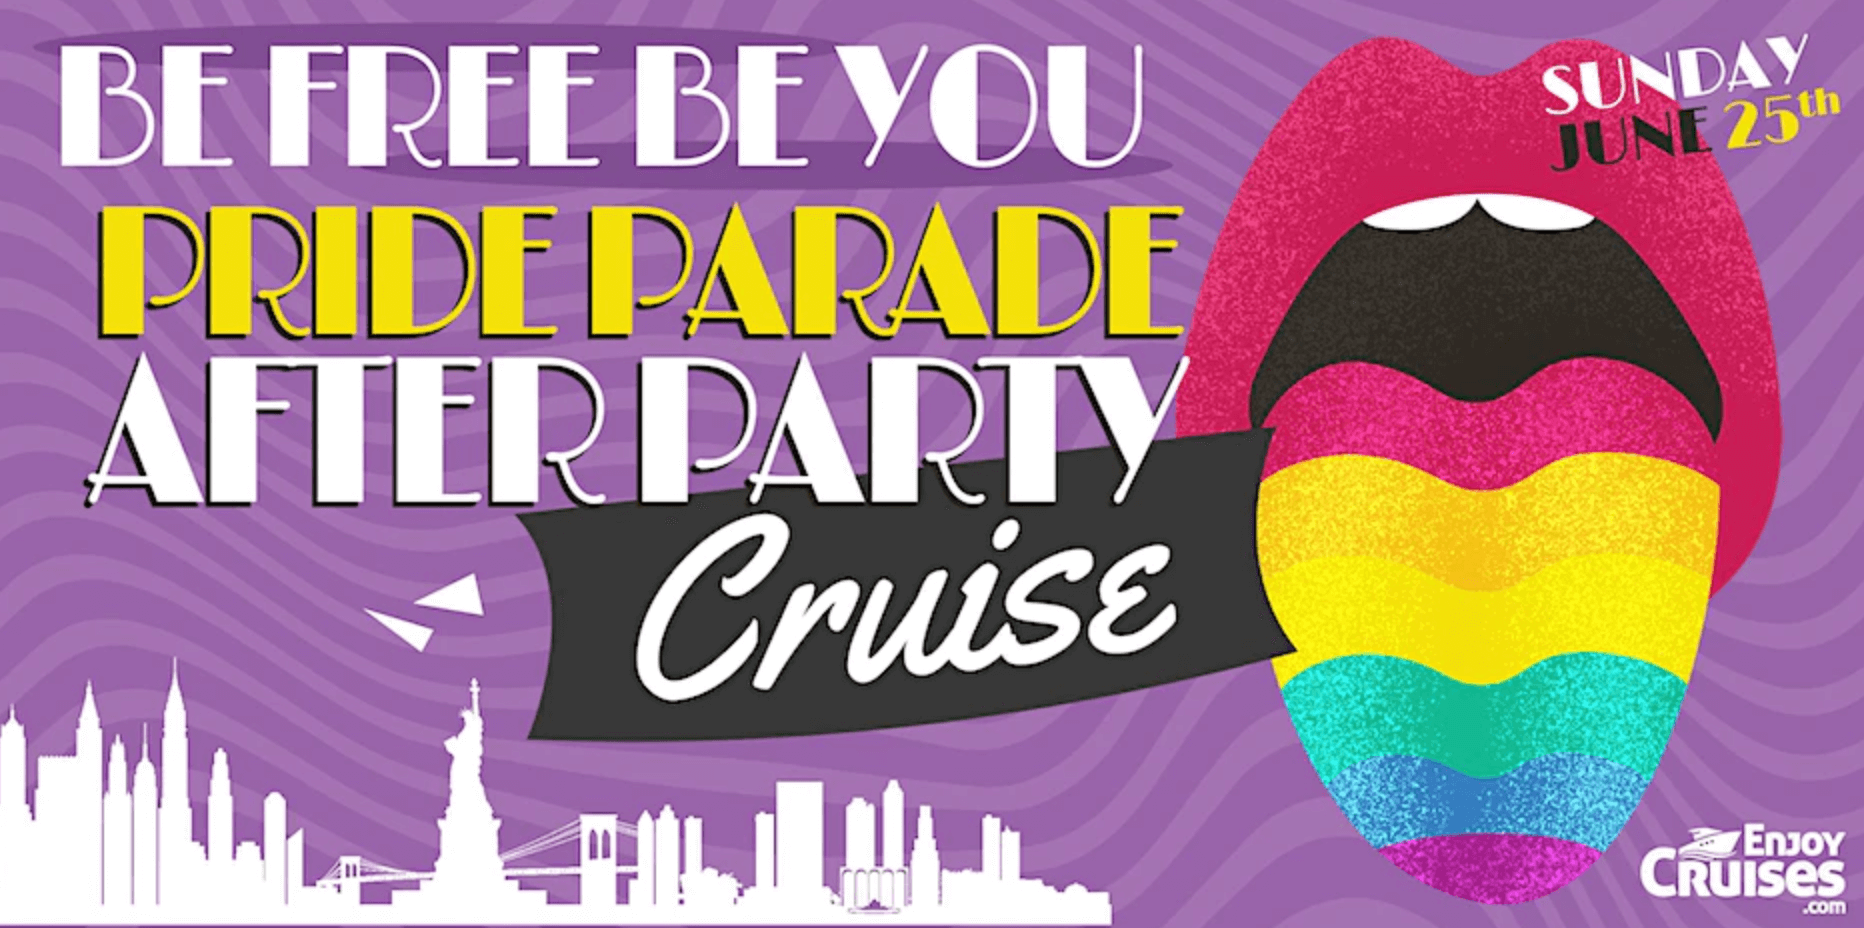 Sii libero, sii te stesso - NYC Pride Parade After Party Cruise